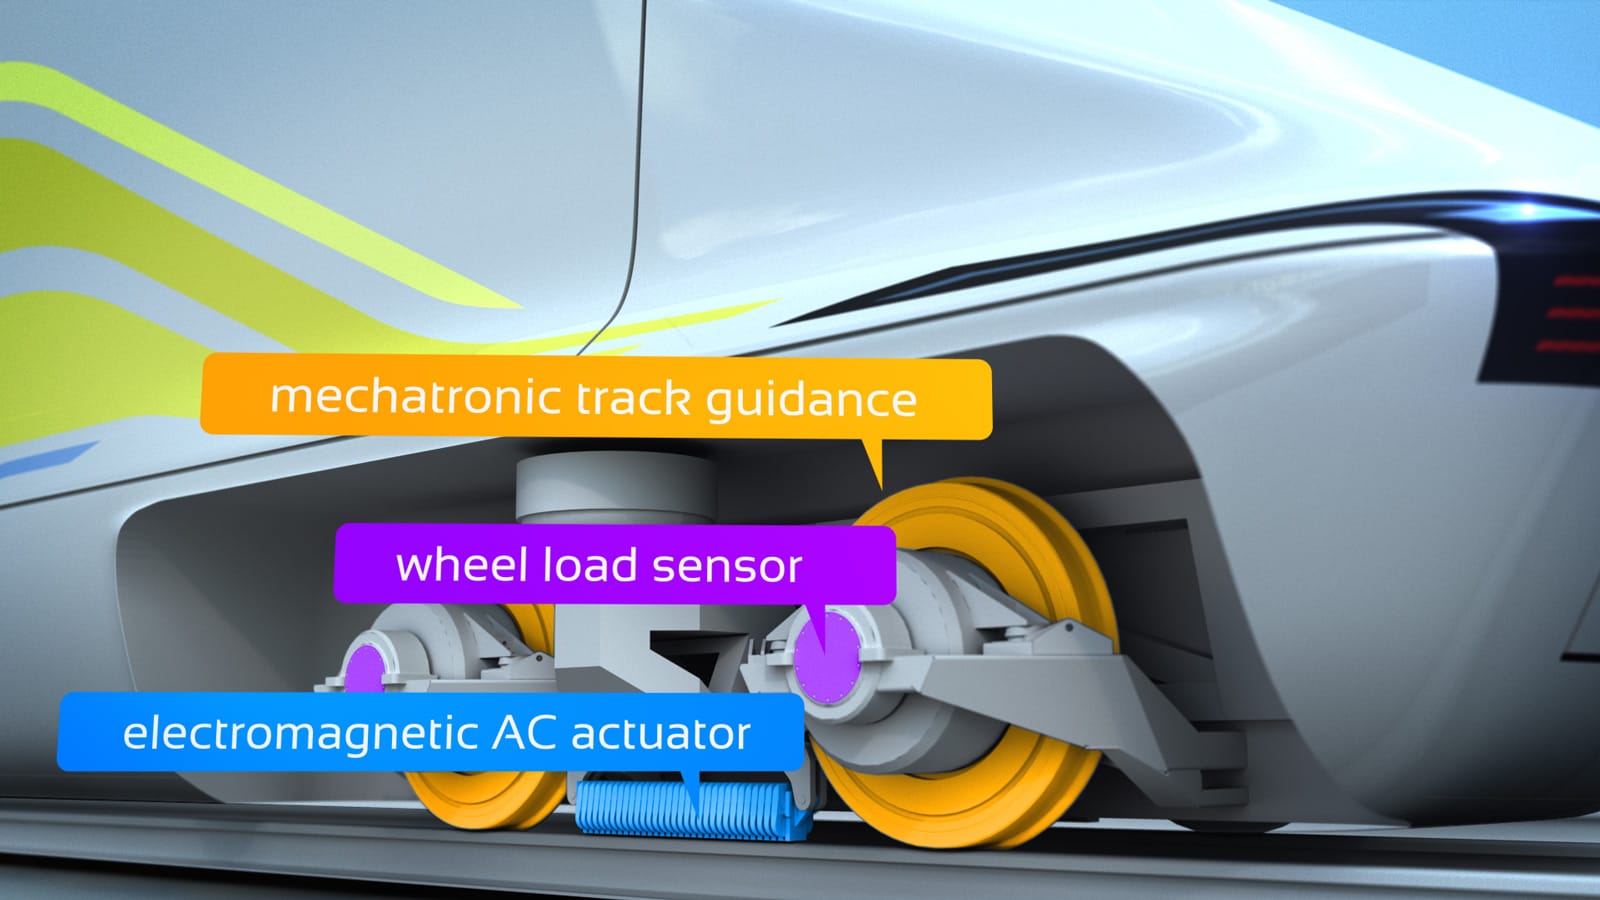 Components of the active crosswind stability control